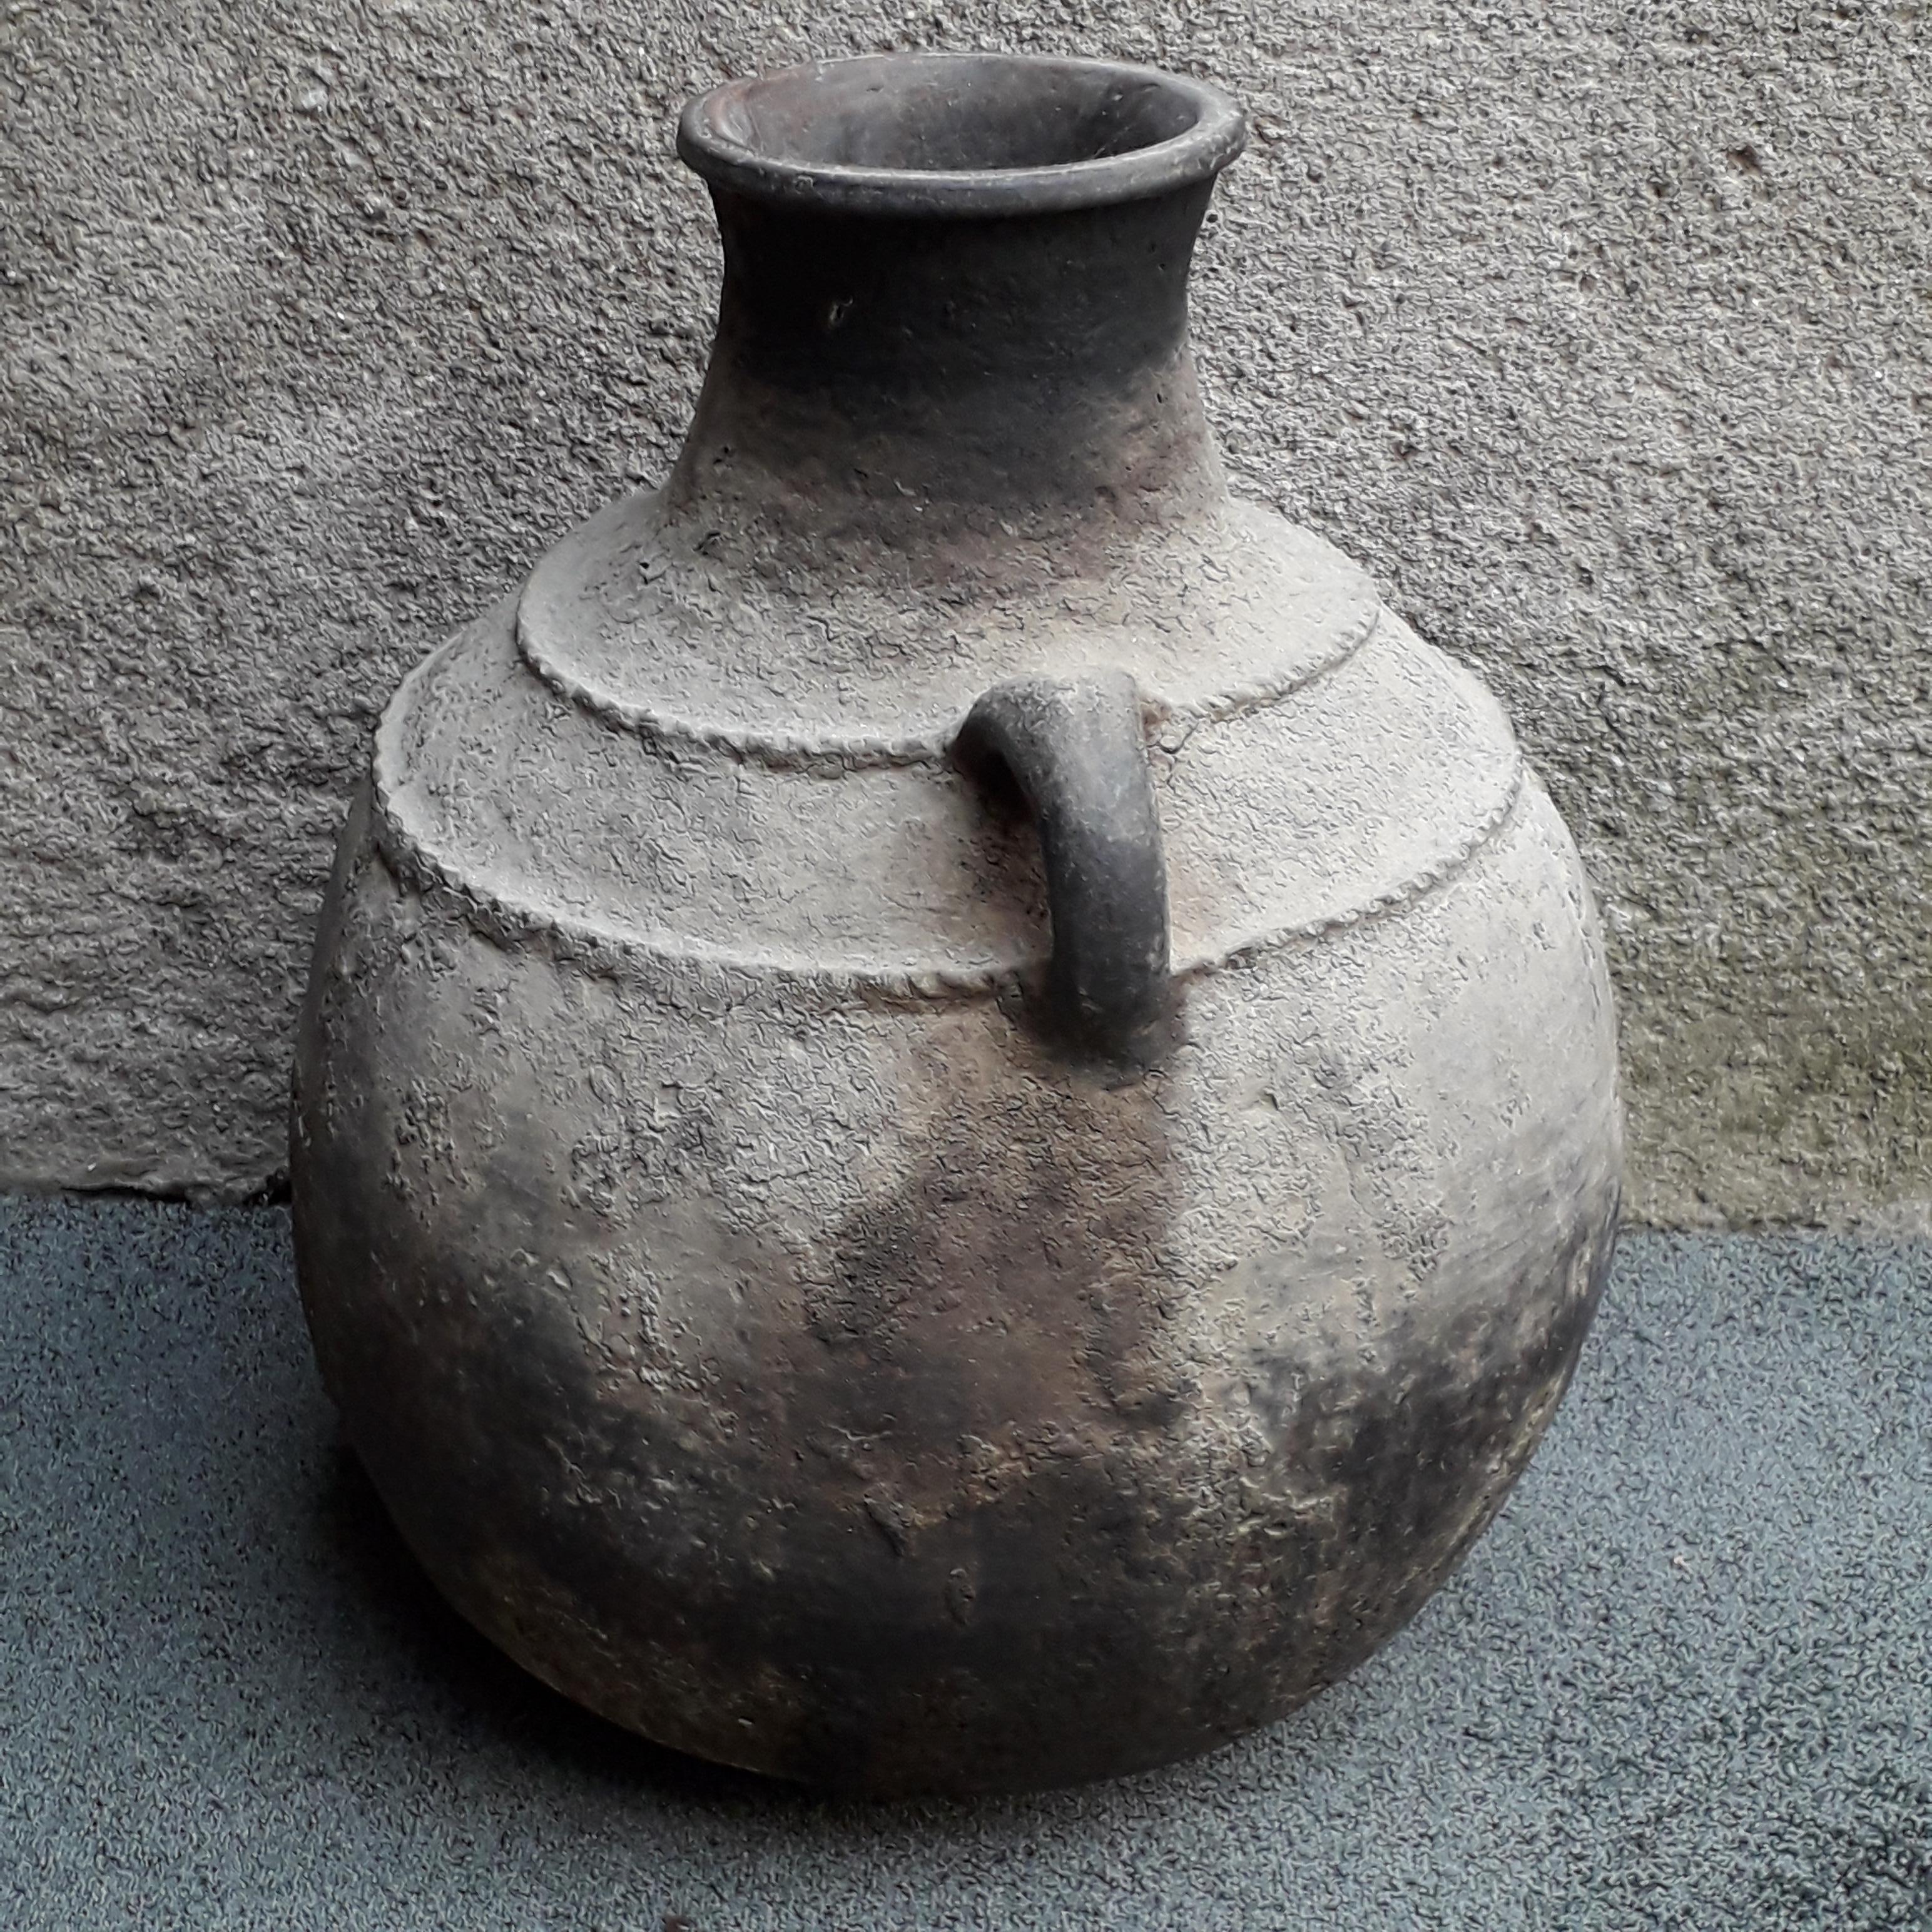 Large terracotta water jug, Berber tribe, collected in situ at the inhabitant. Provenance ksar Ait Ben Haddou, province of Ouarzazate.
Object of everyday life made by hand with a beautiful patina of use.
Measures: Height 58 cm, diameter 48 cm.